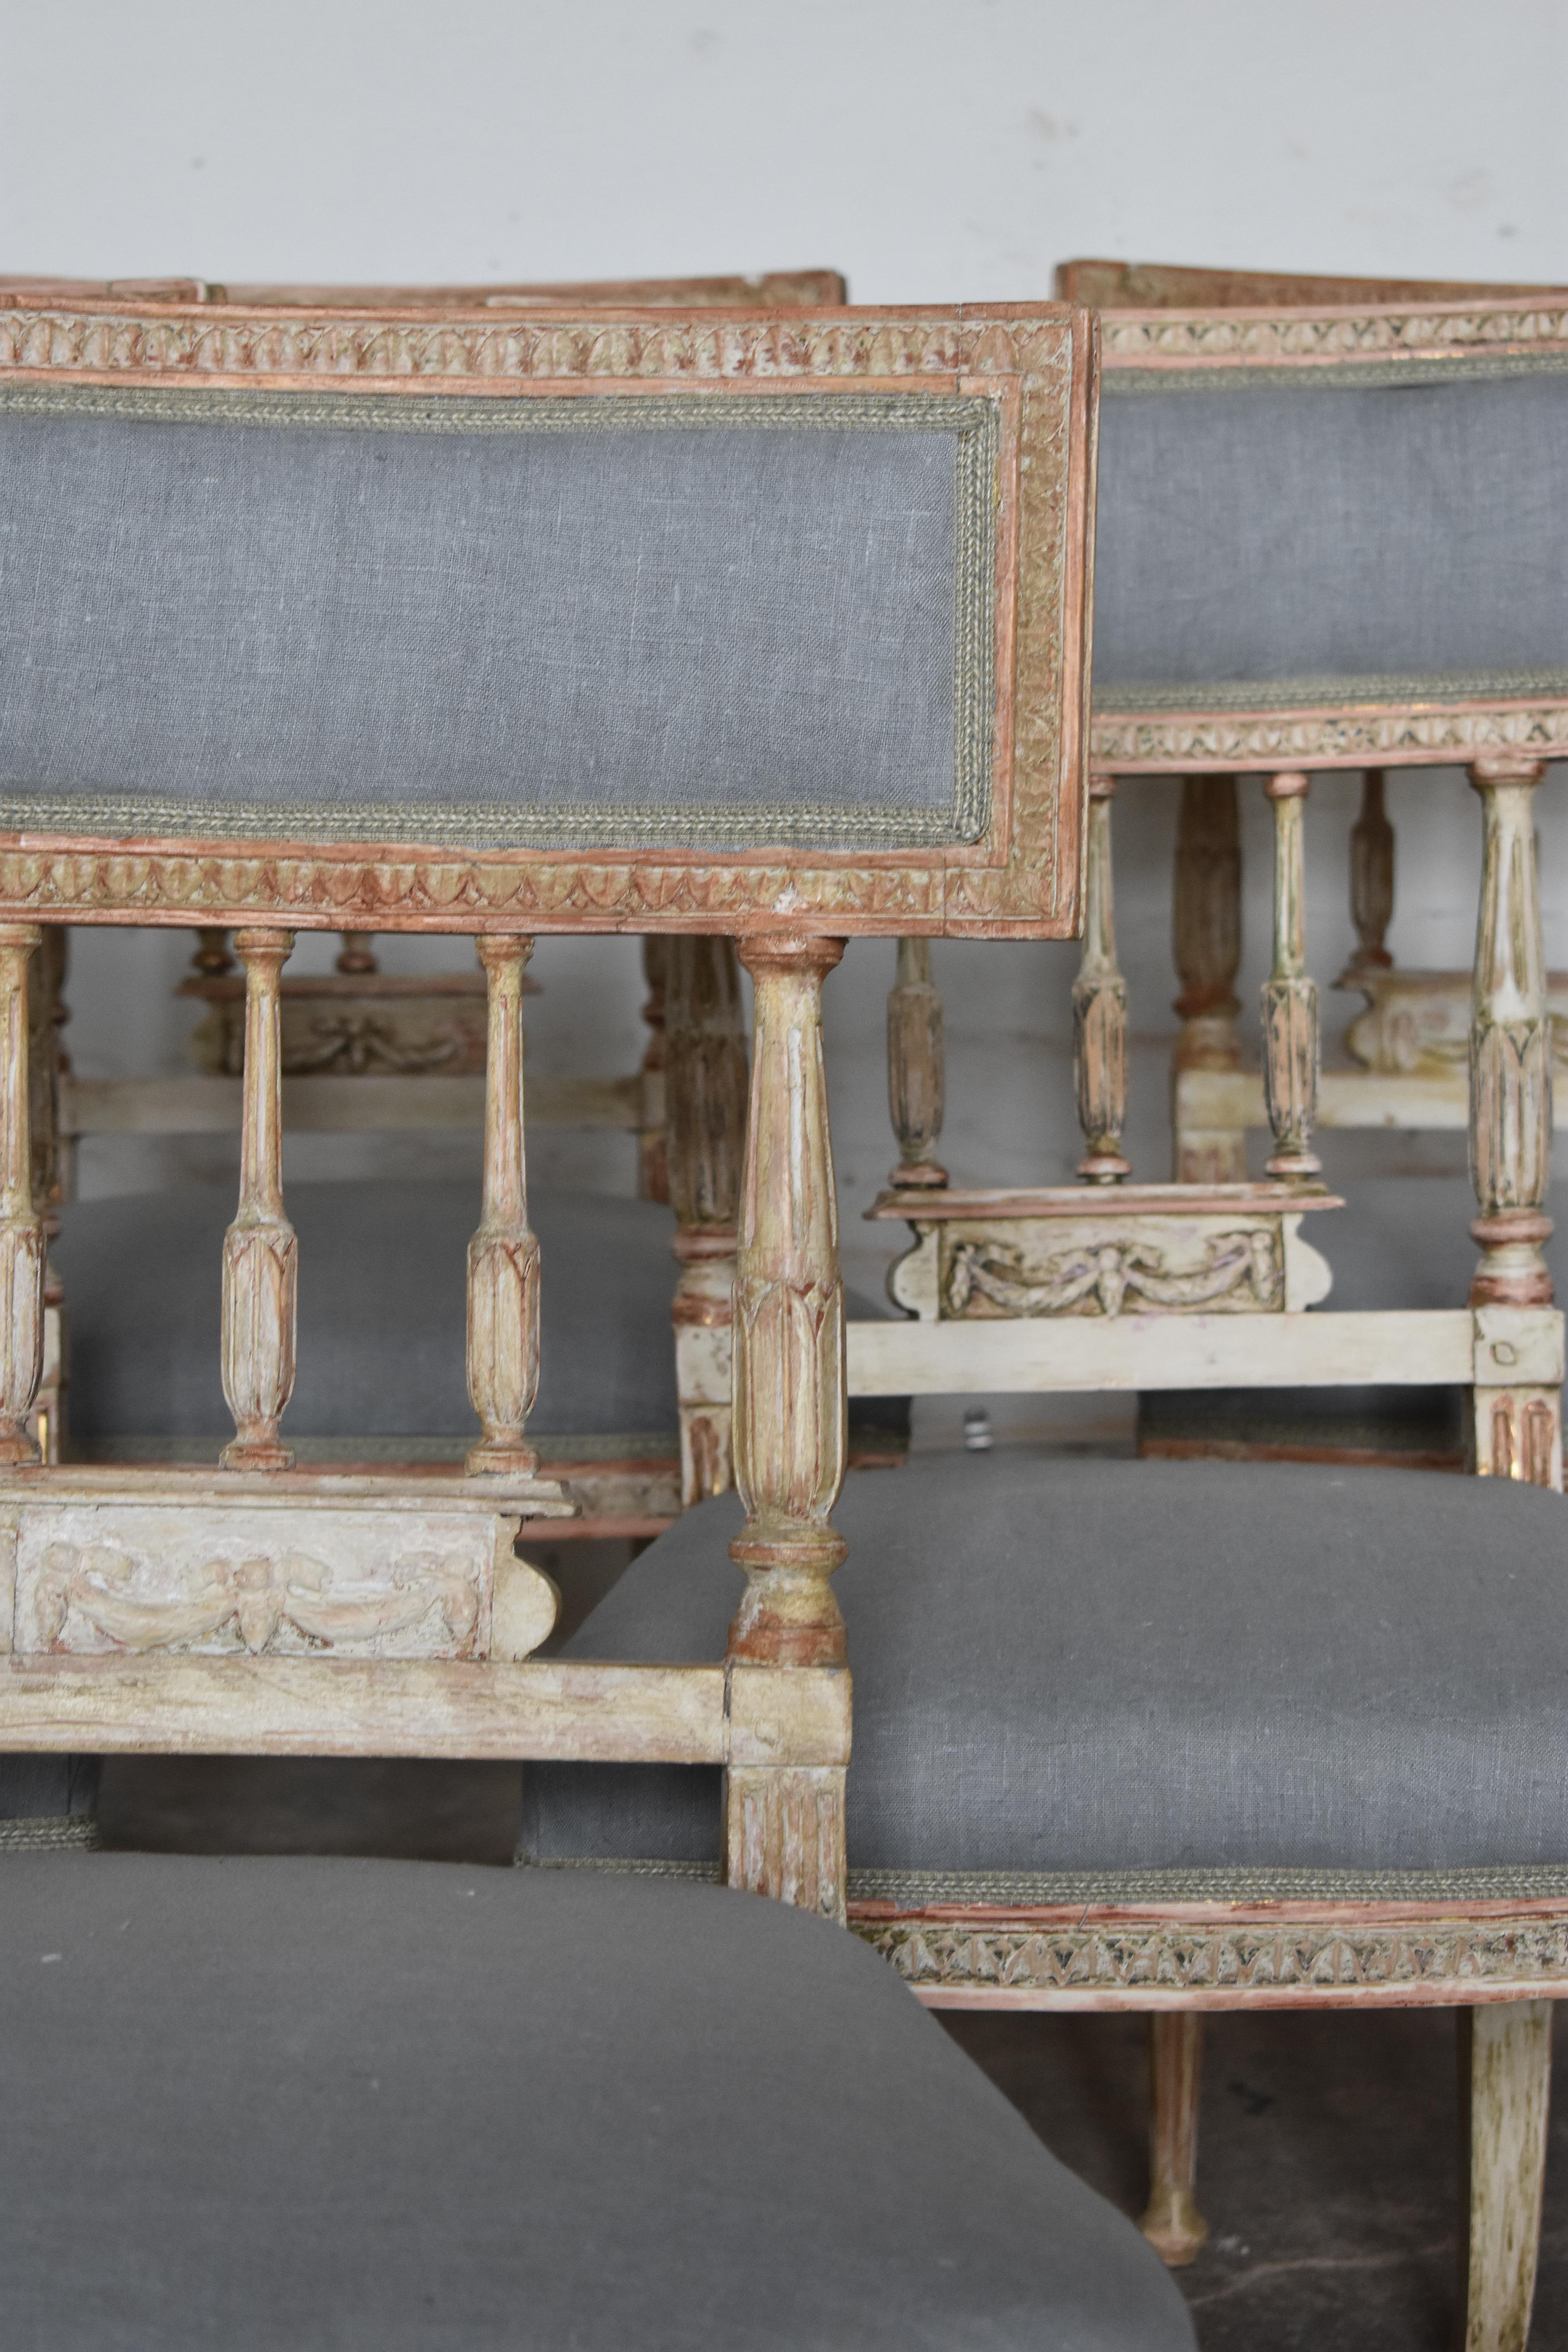 Swedish late Gustavian chairs, set of 6, by Anders Hellman Master-craftsman in Stockholm (1761-1794), signed AHM

Scraped to original color, signs of old guilt work 
New fabric 
Original upholstery.